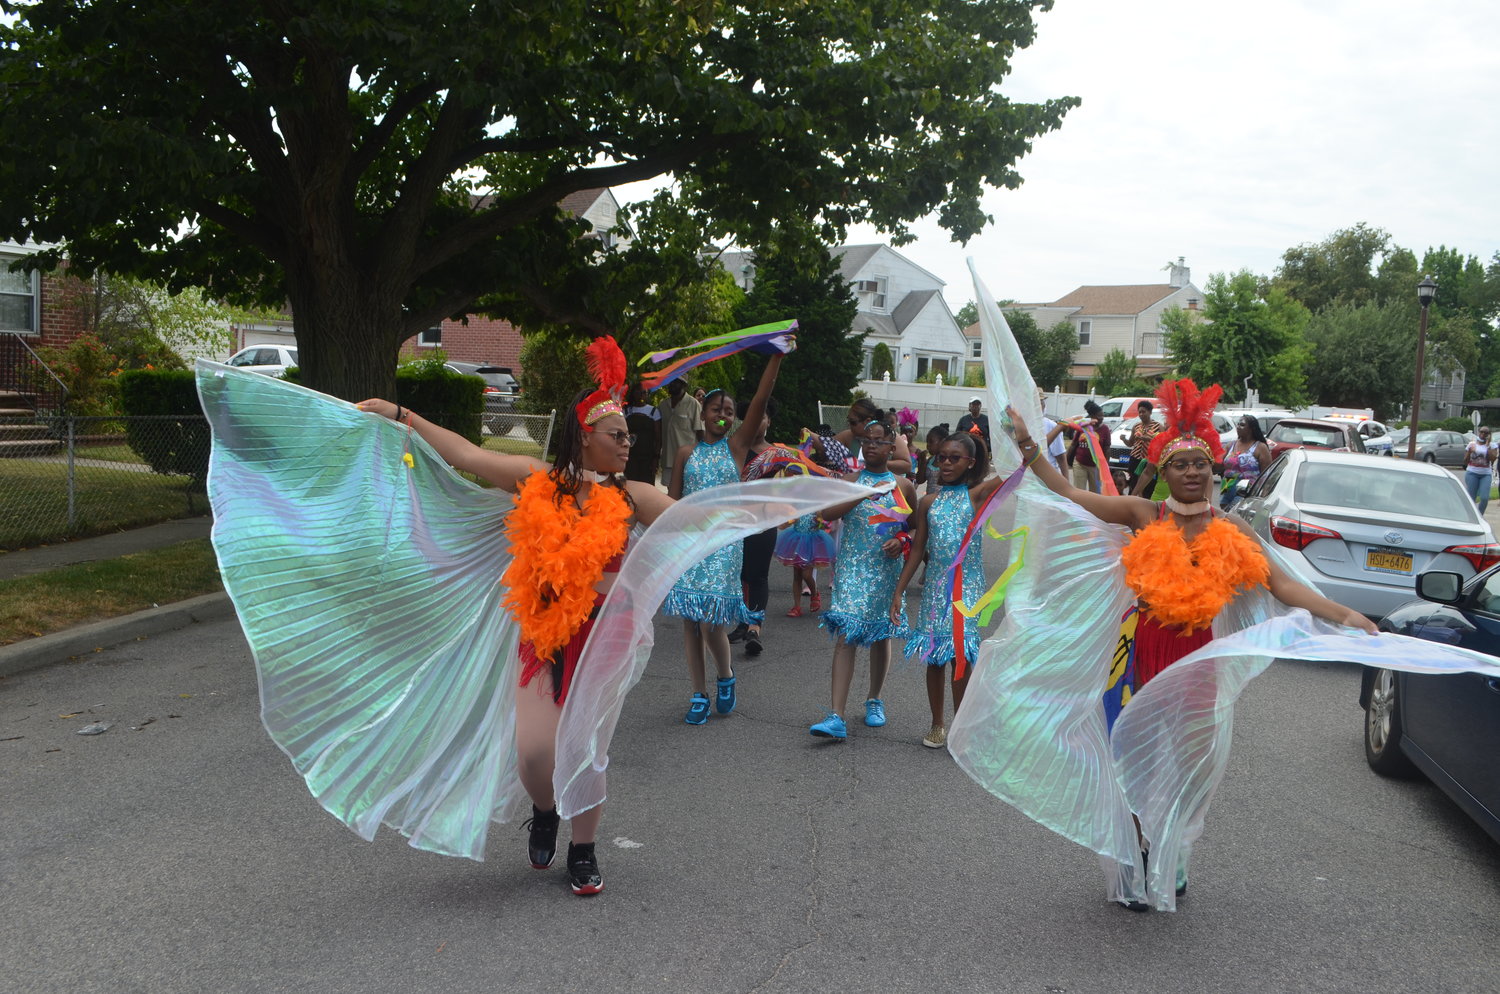 Children ages four to 17 who attend the dance school participated in the parade and festival while wearing costumes from their annual dance recital.